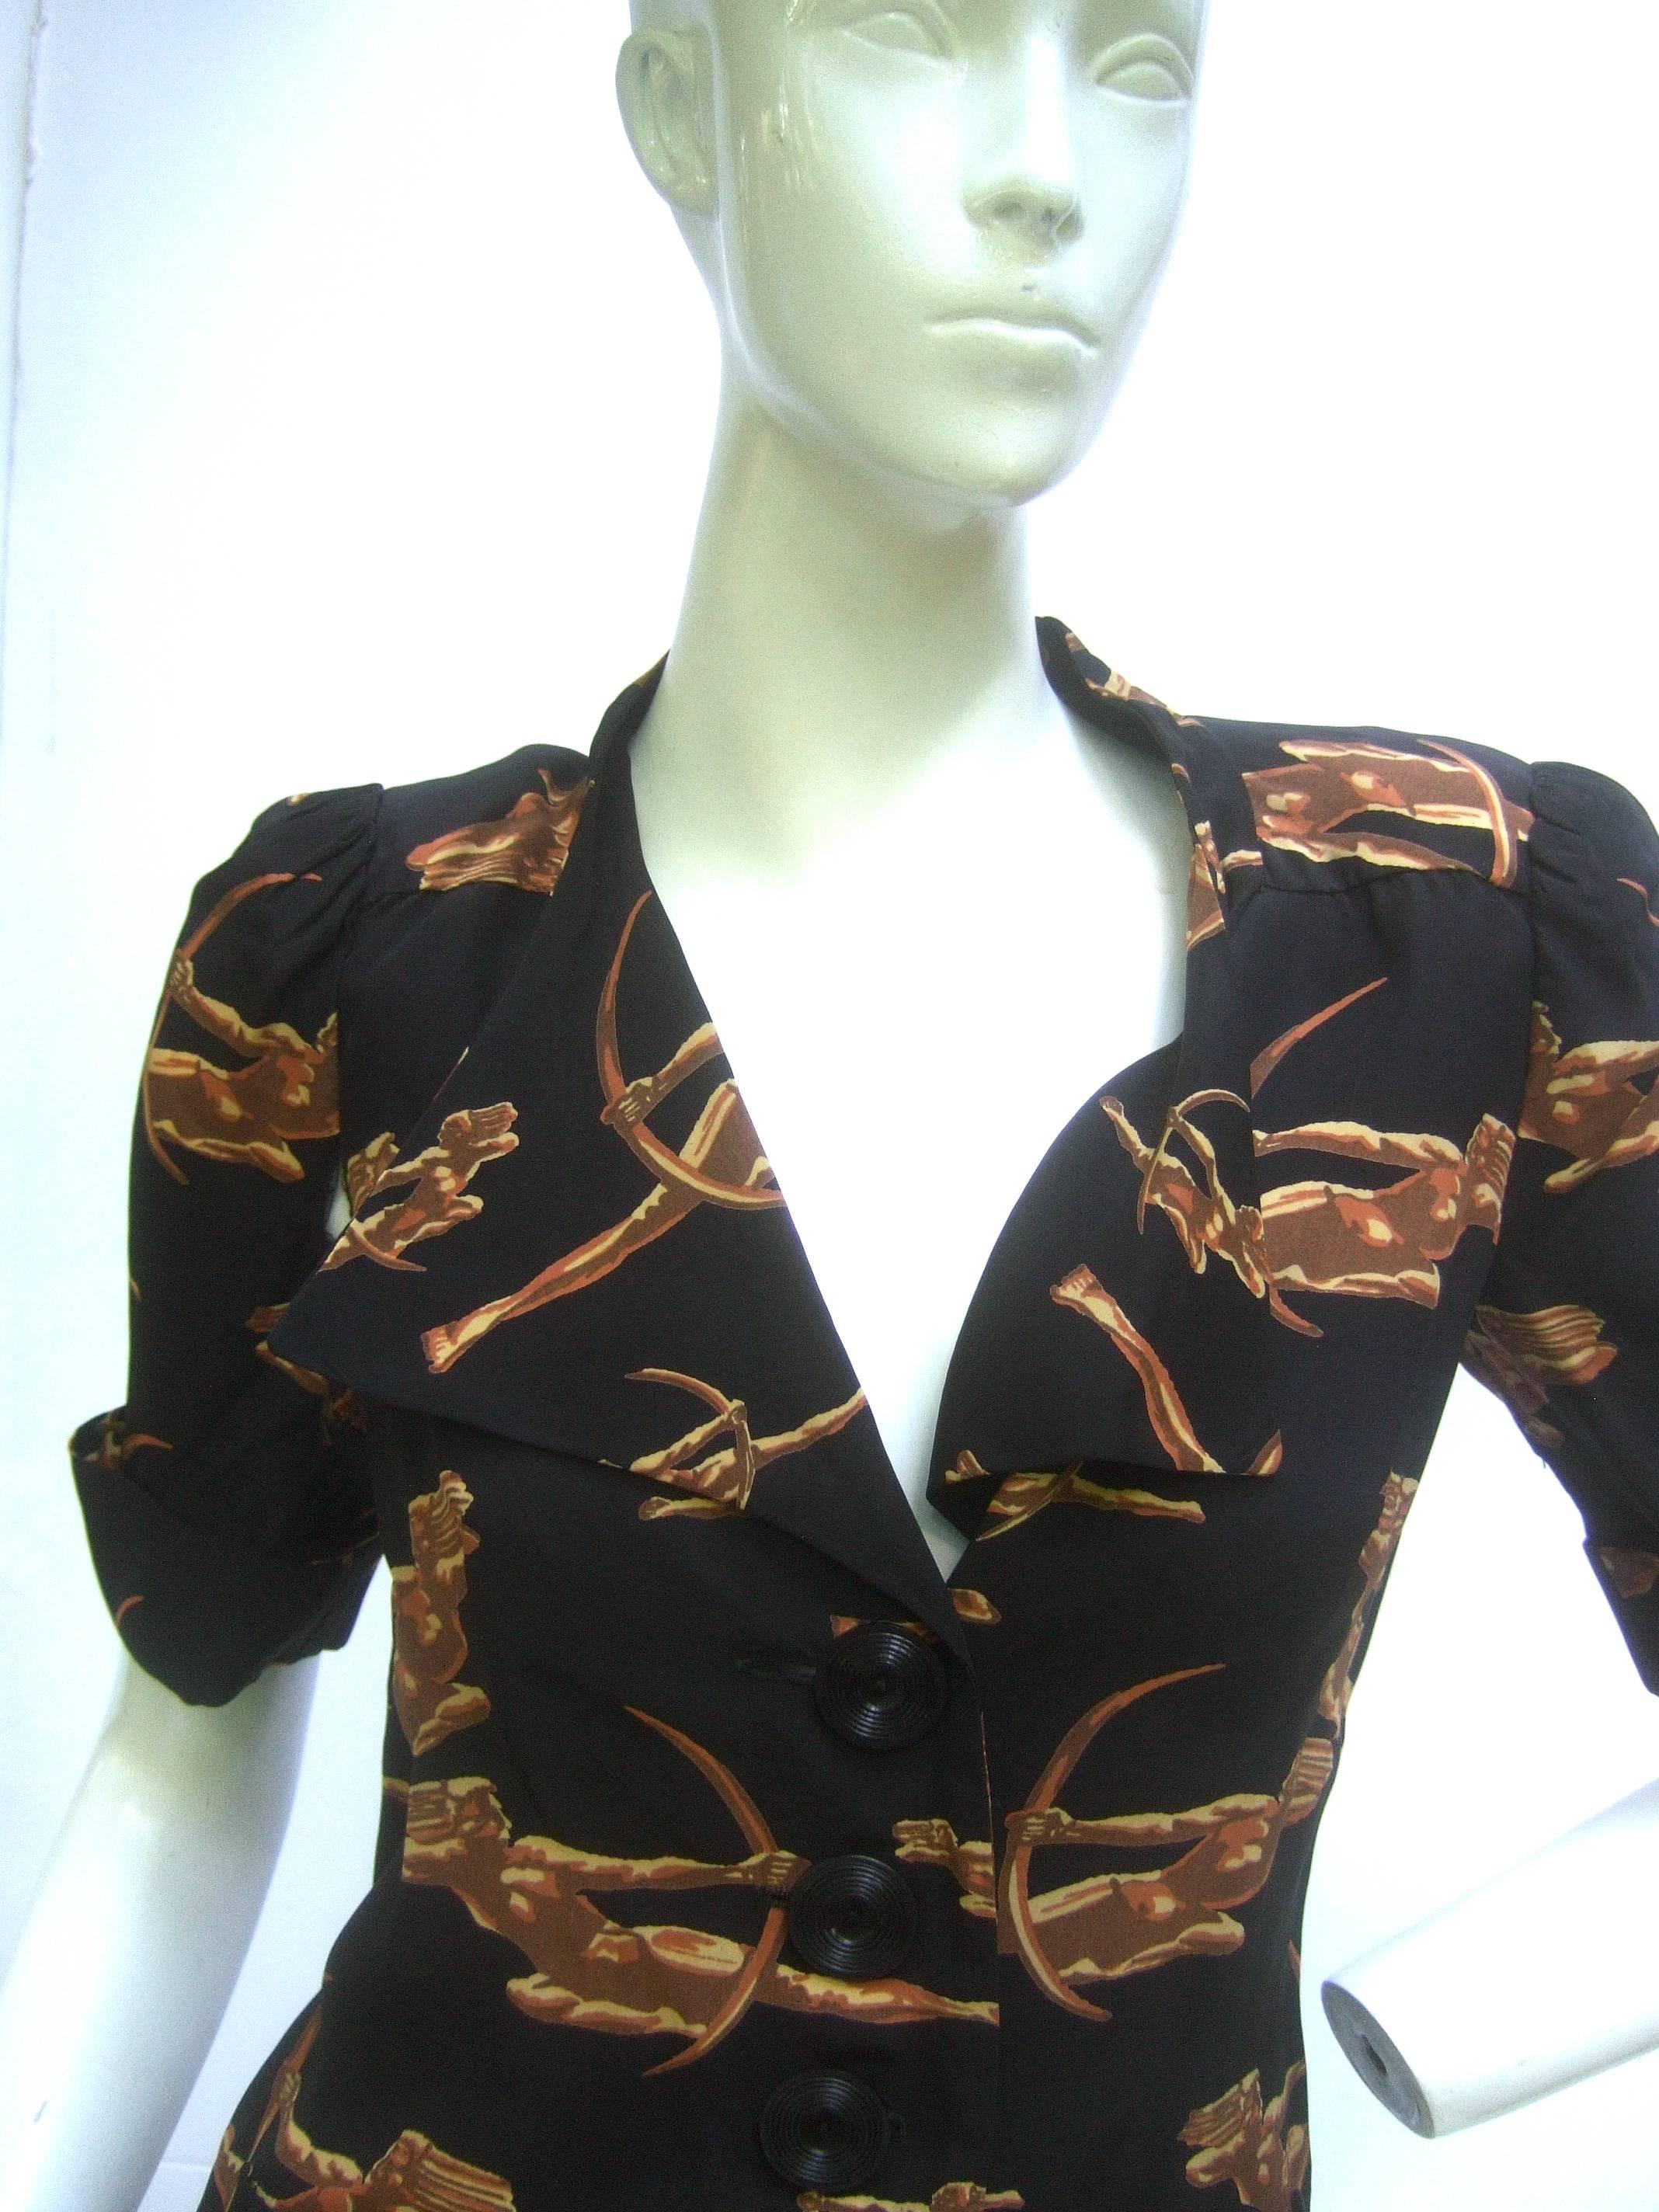 Biba Blouse Printed With Classical Archers. Late 1960's. 2